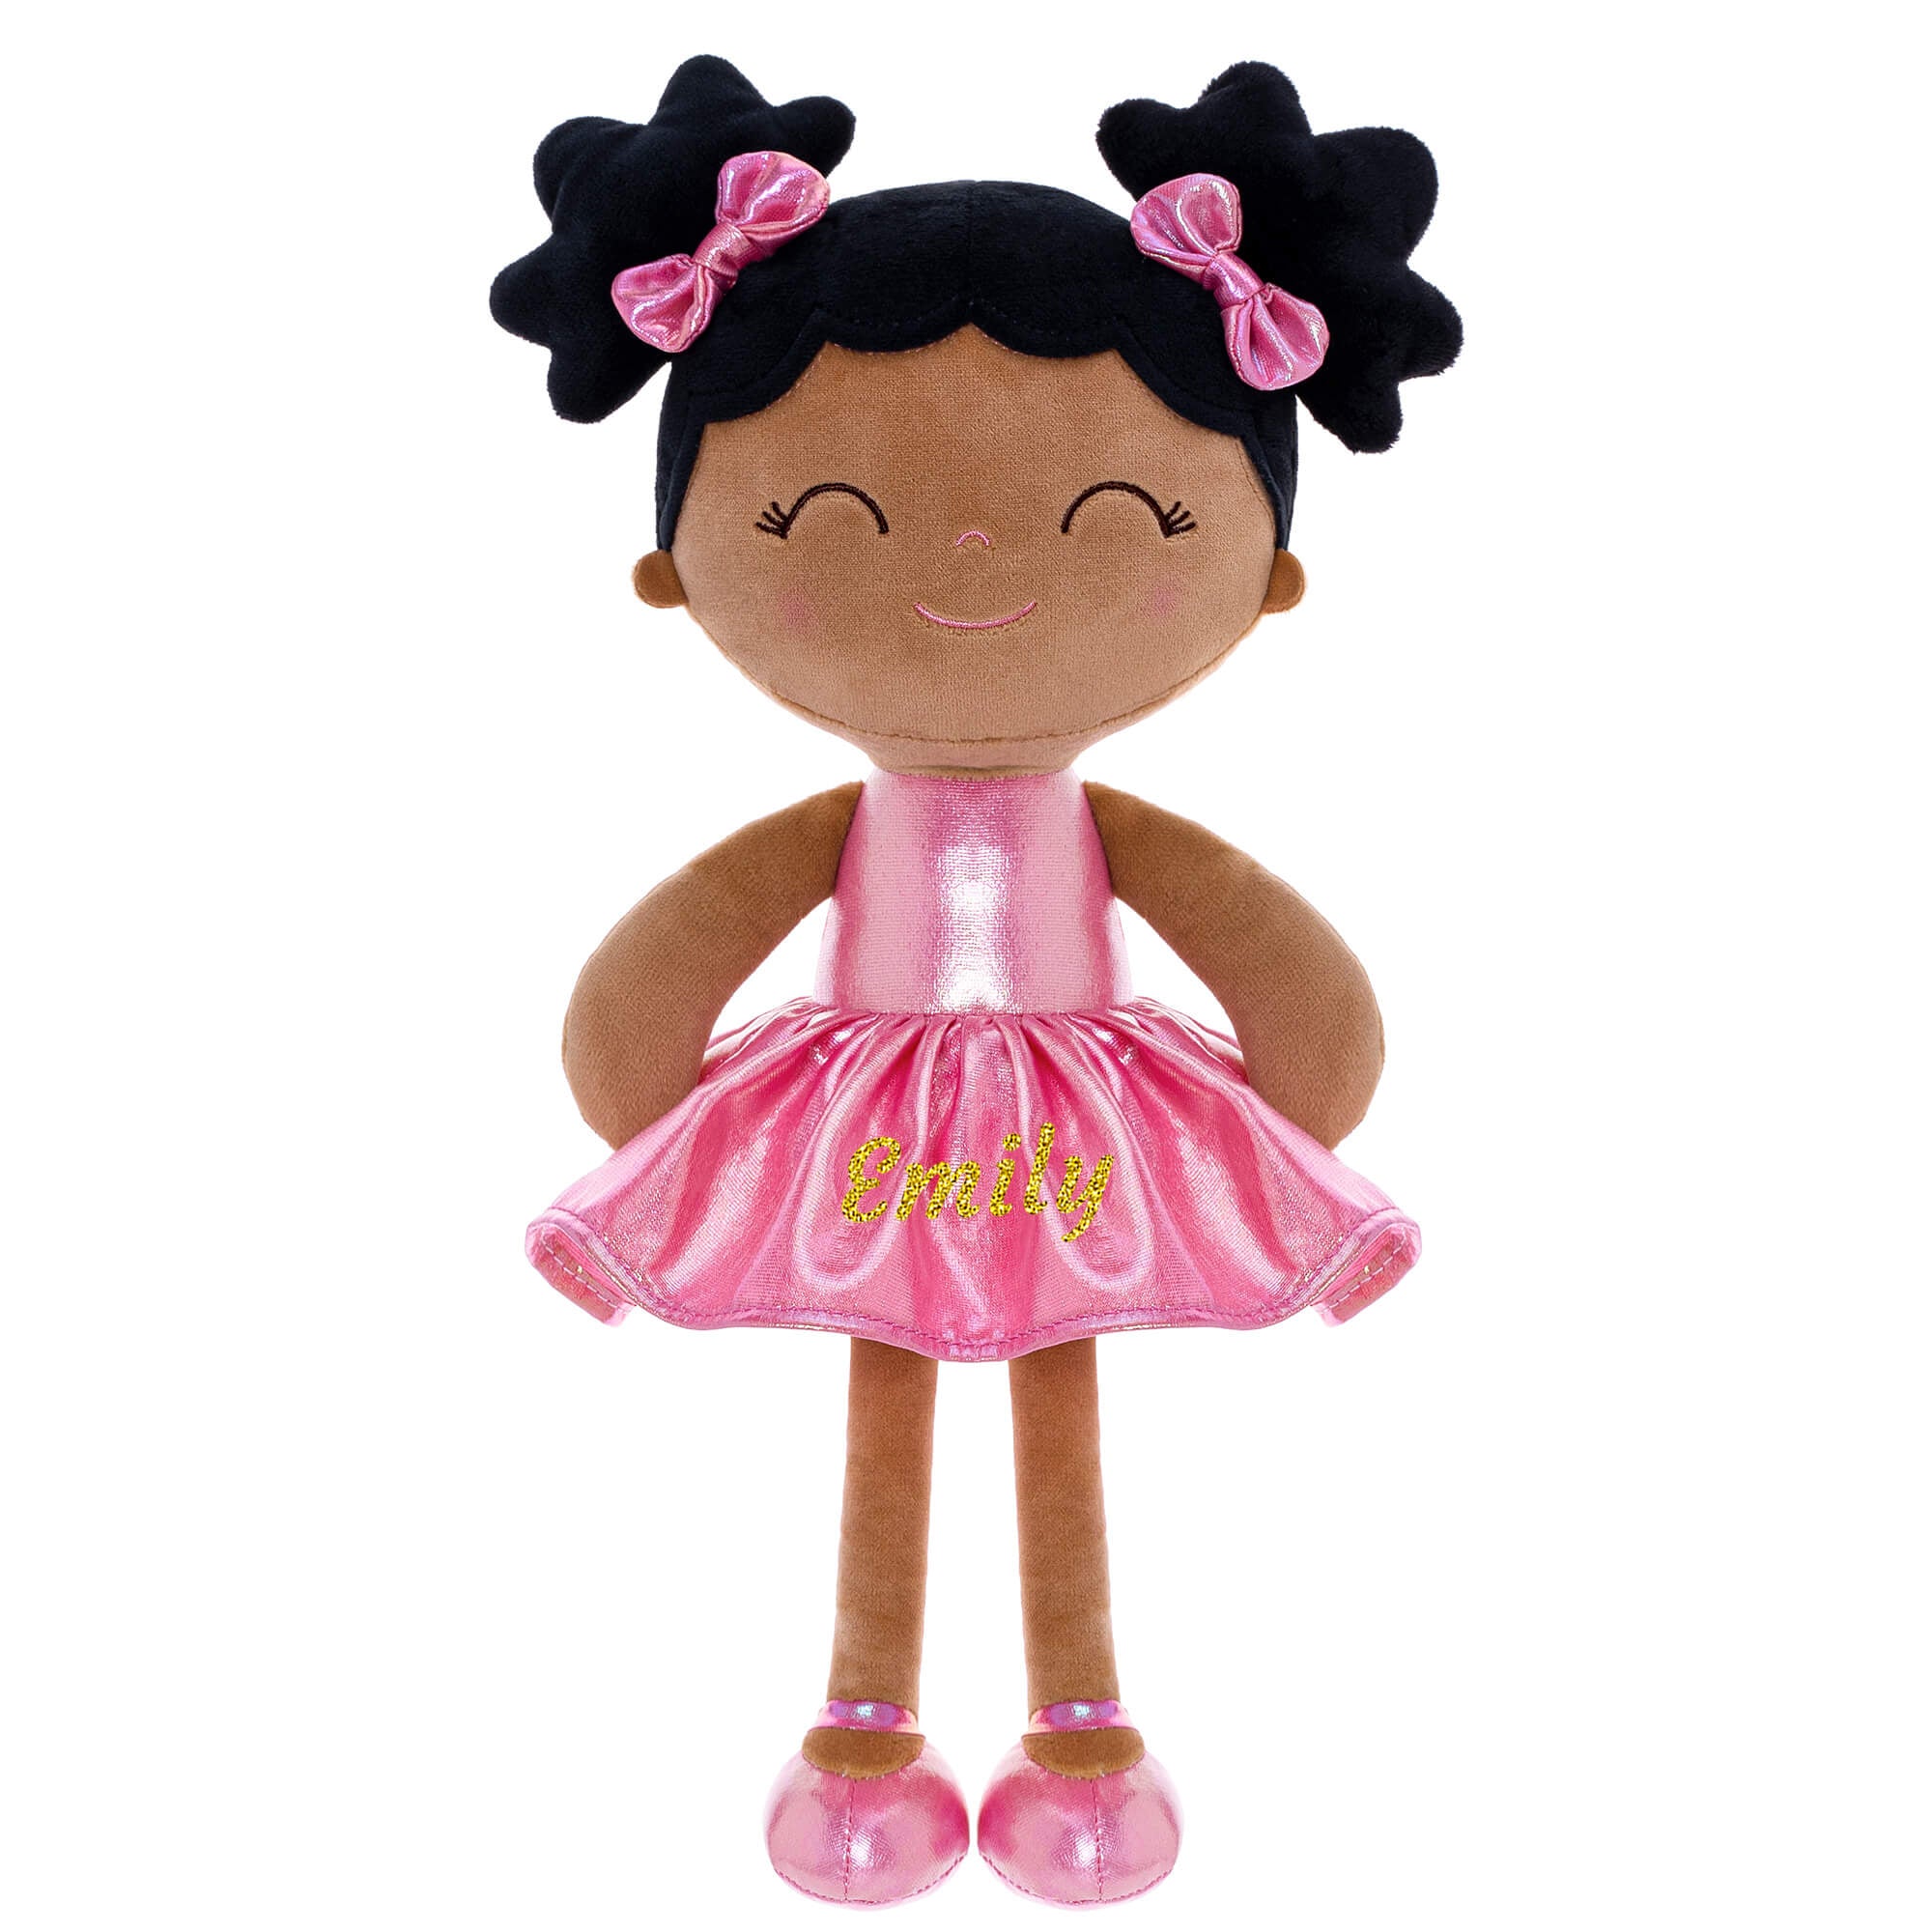 Gloveleya 12-inch Personalized Plush Dolls Curly Haired Iridescent Girls - Tanned Rose